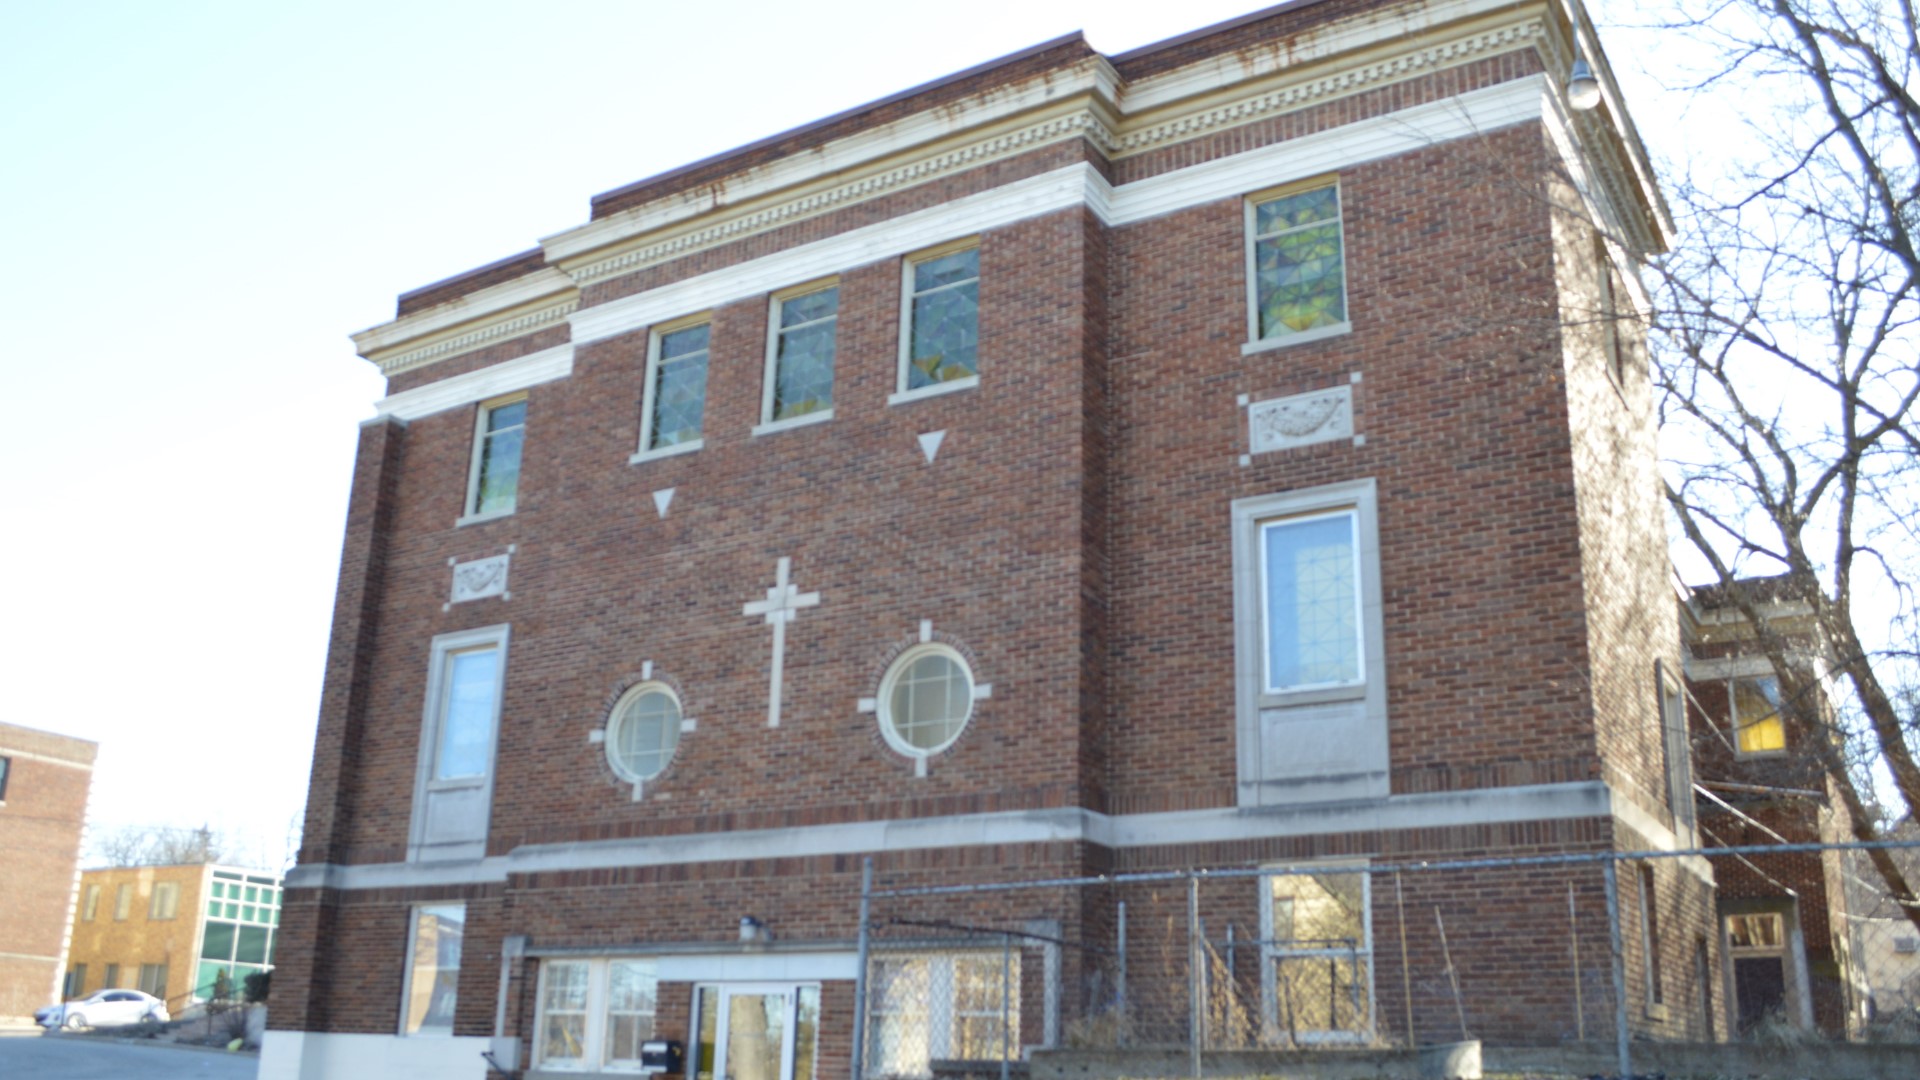 As Grand Rapids’ old industrial buildings are turning into mixed-use developments, housing developers are running out of inventory. But vacant houses of worship are proving to be an attractive alternative.